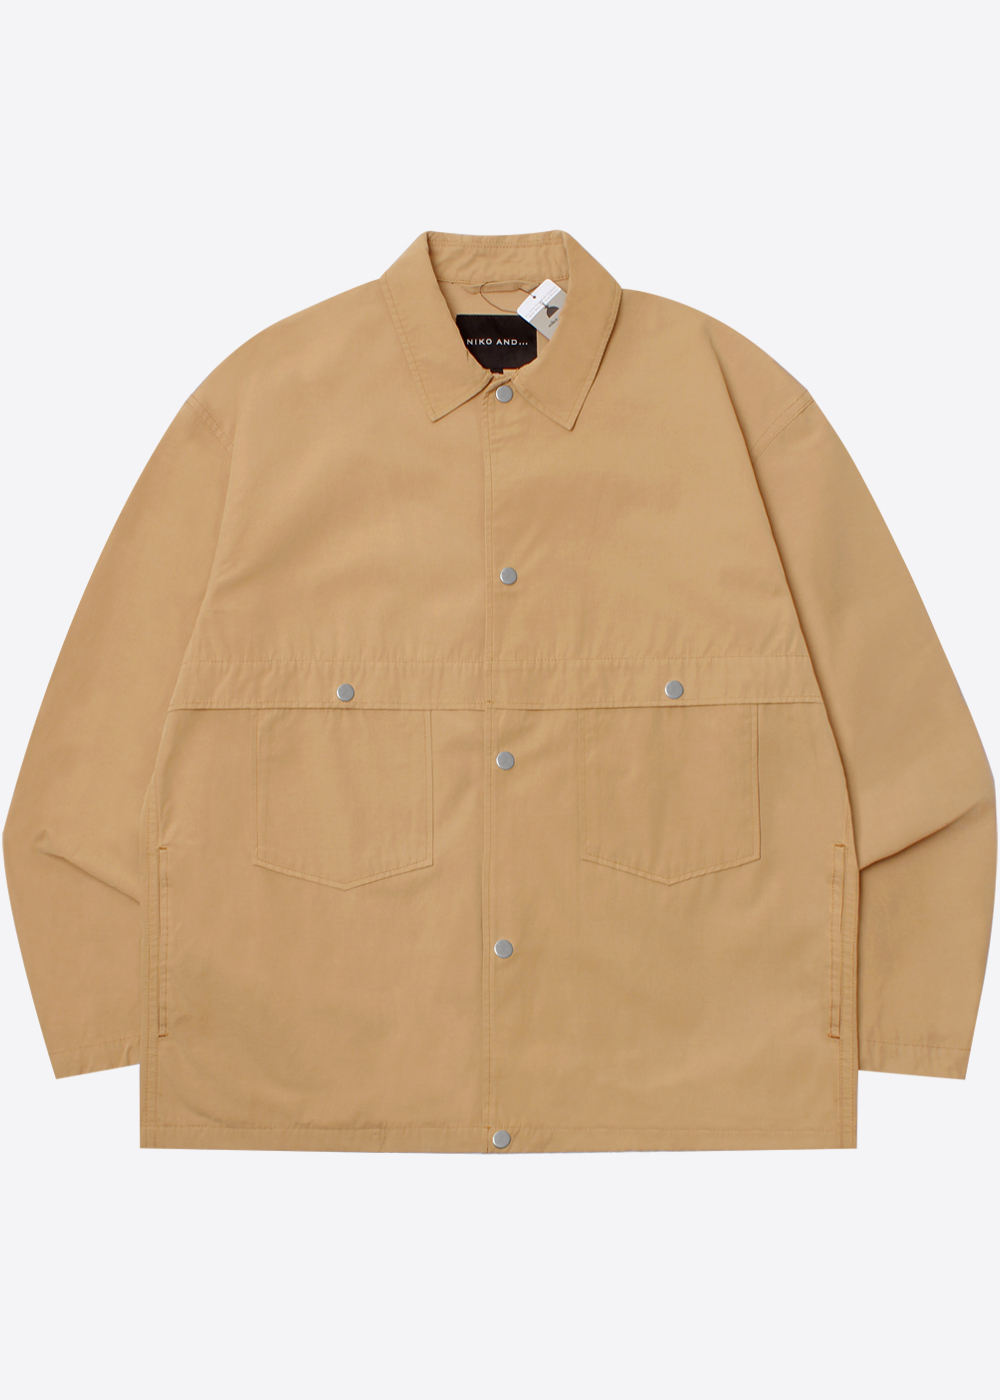 NIKO AND’over fit’cotton hunting jacket